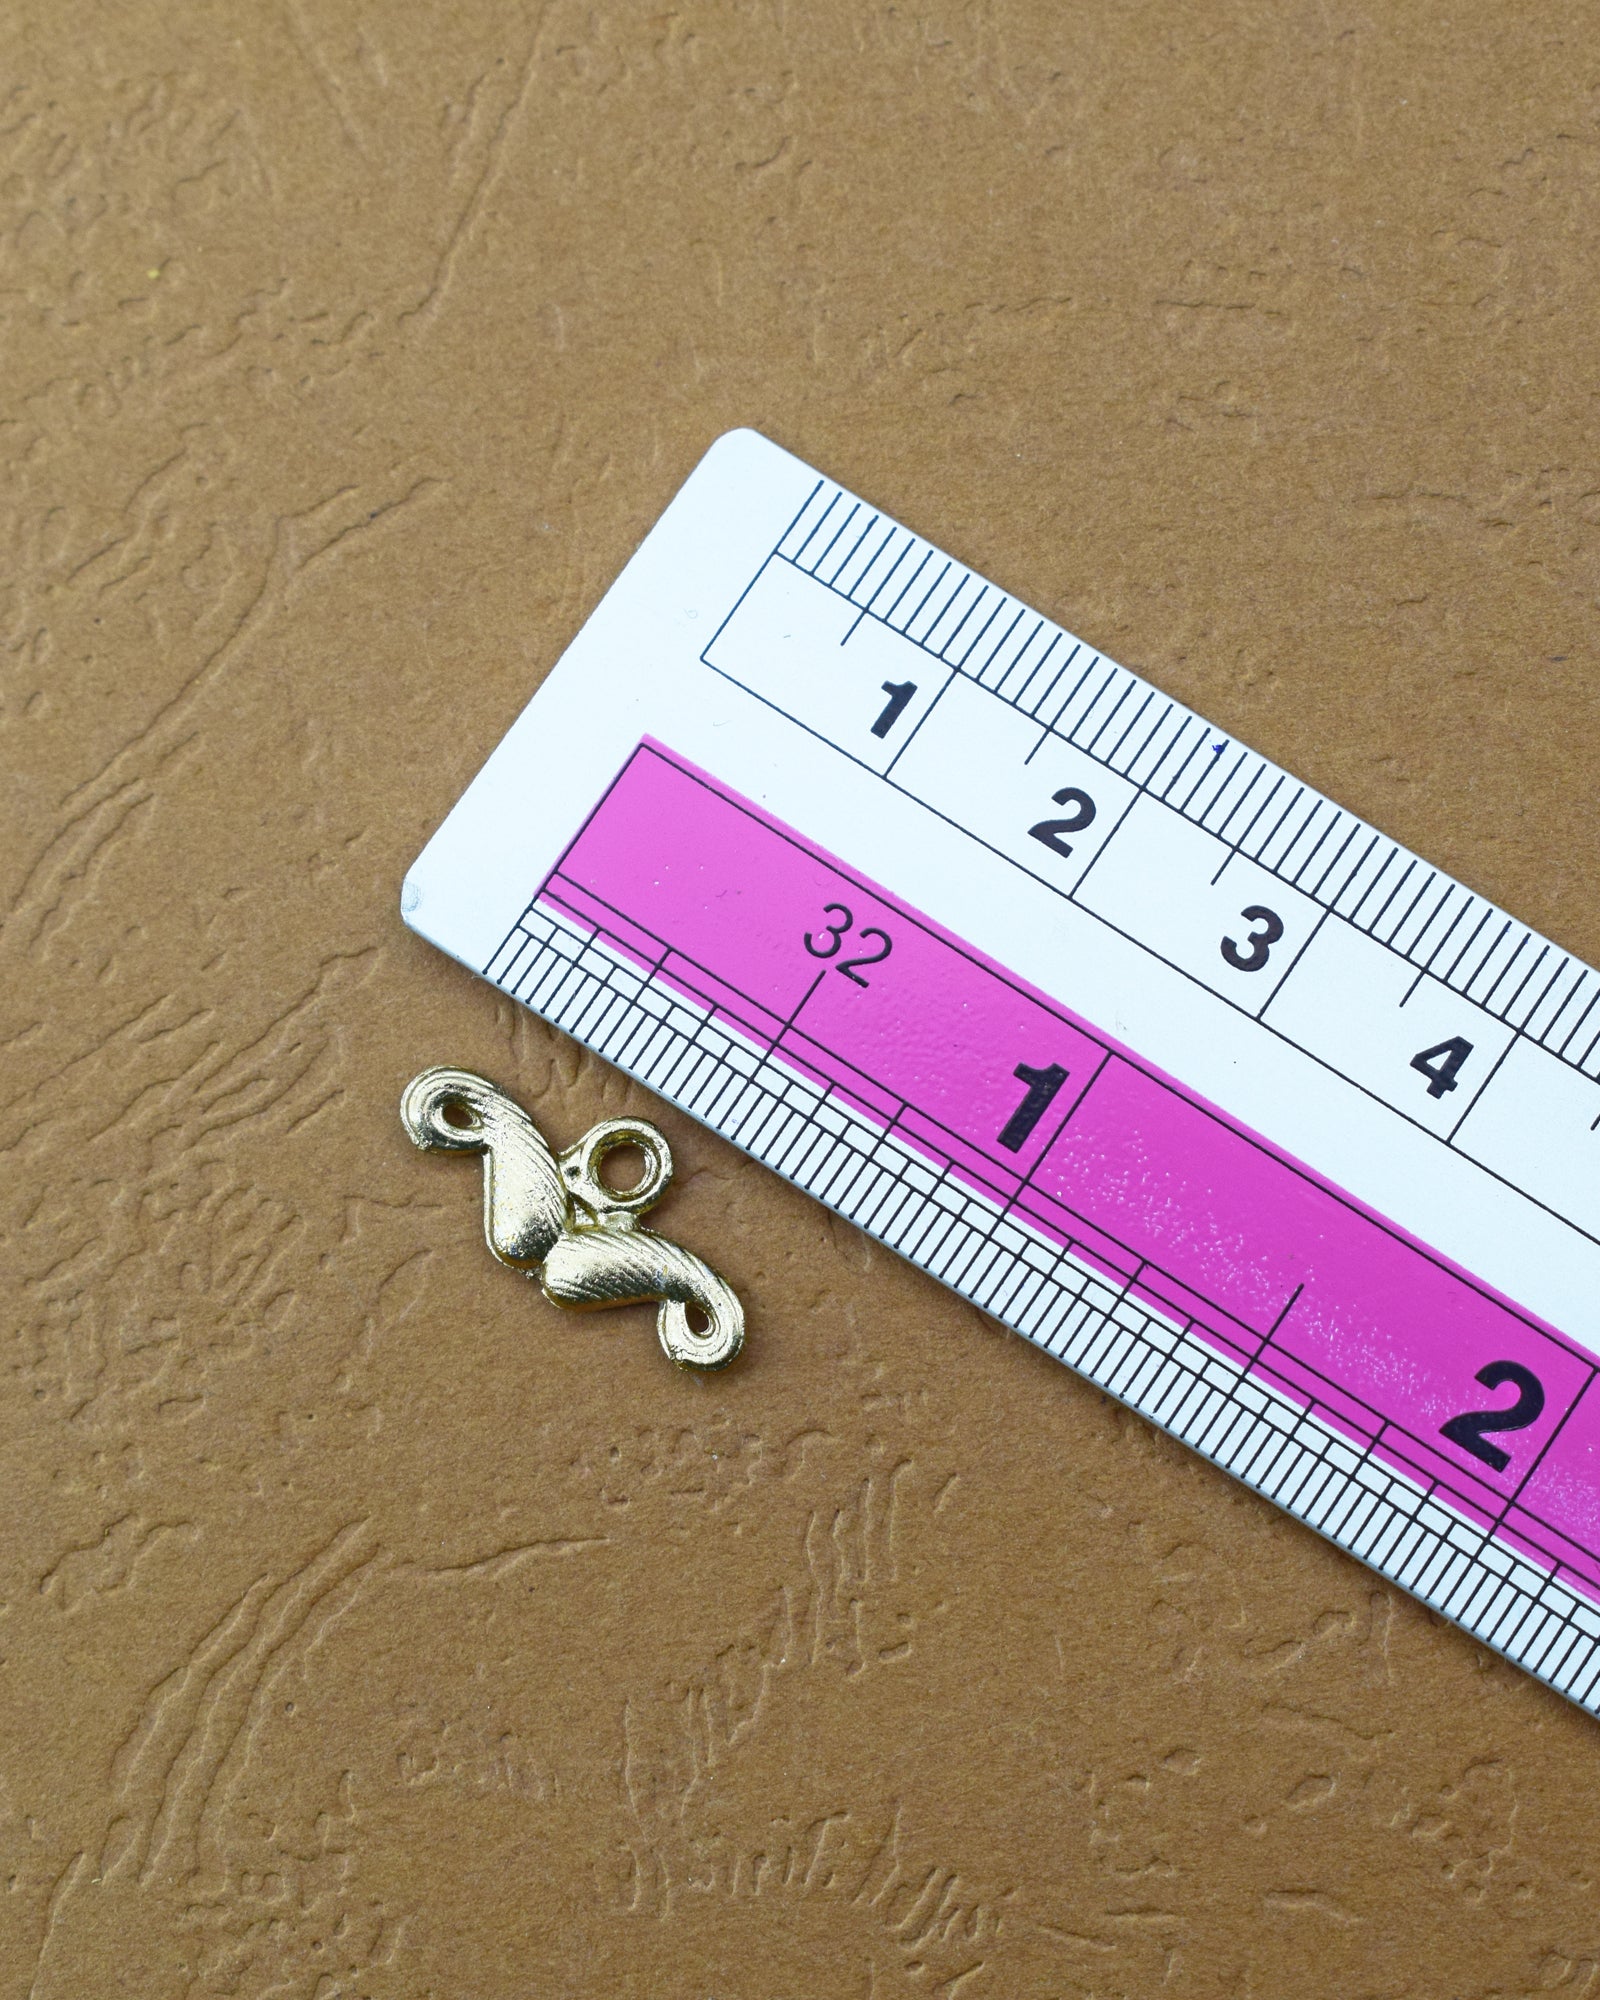 The 'Metal Accessory MA13' size is showcased using a ruler for precise measurement.